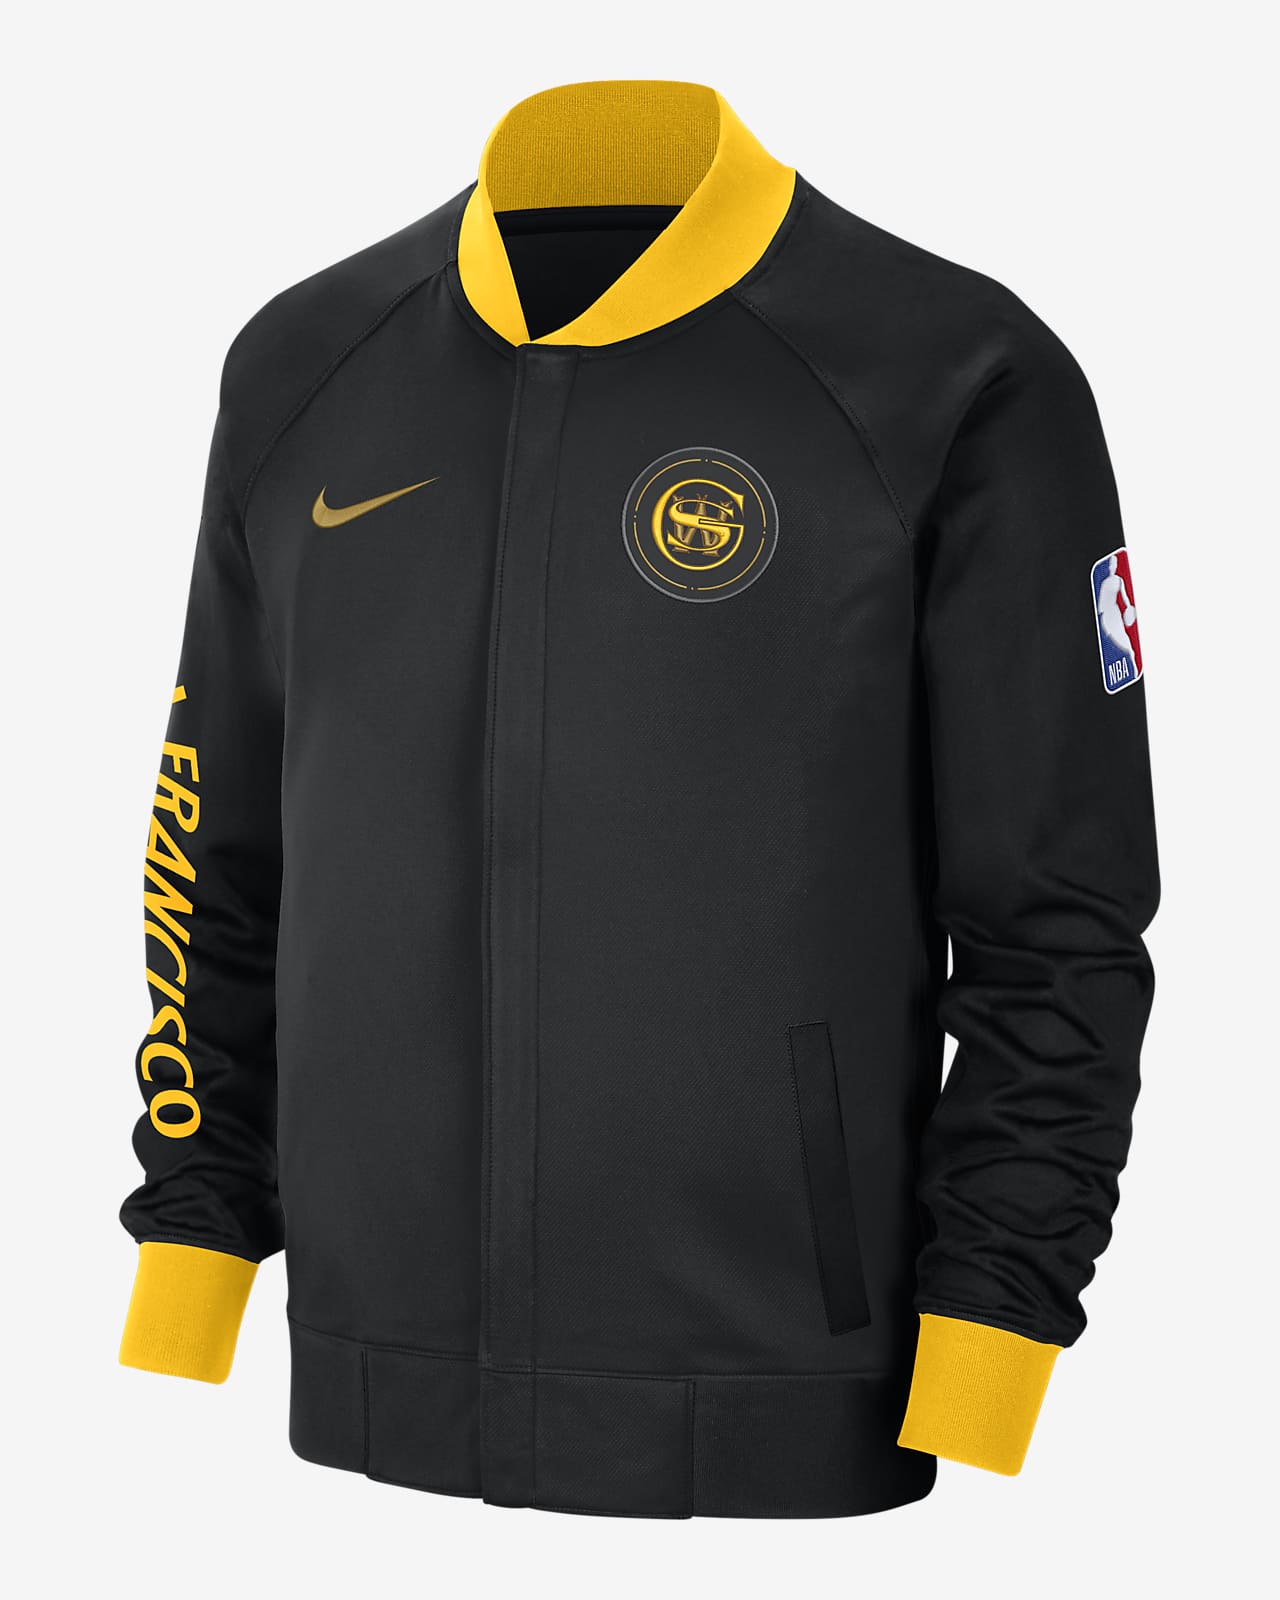 Golden State Warriors Showtime City Edition Men's Nike Dri-FIT Full-Zip Long-Sleeve Jacket